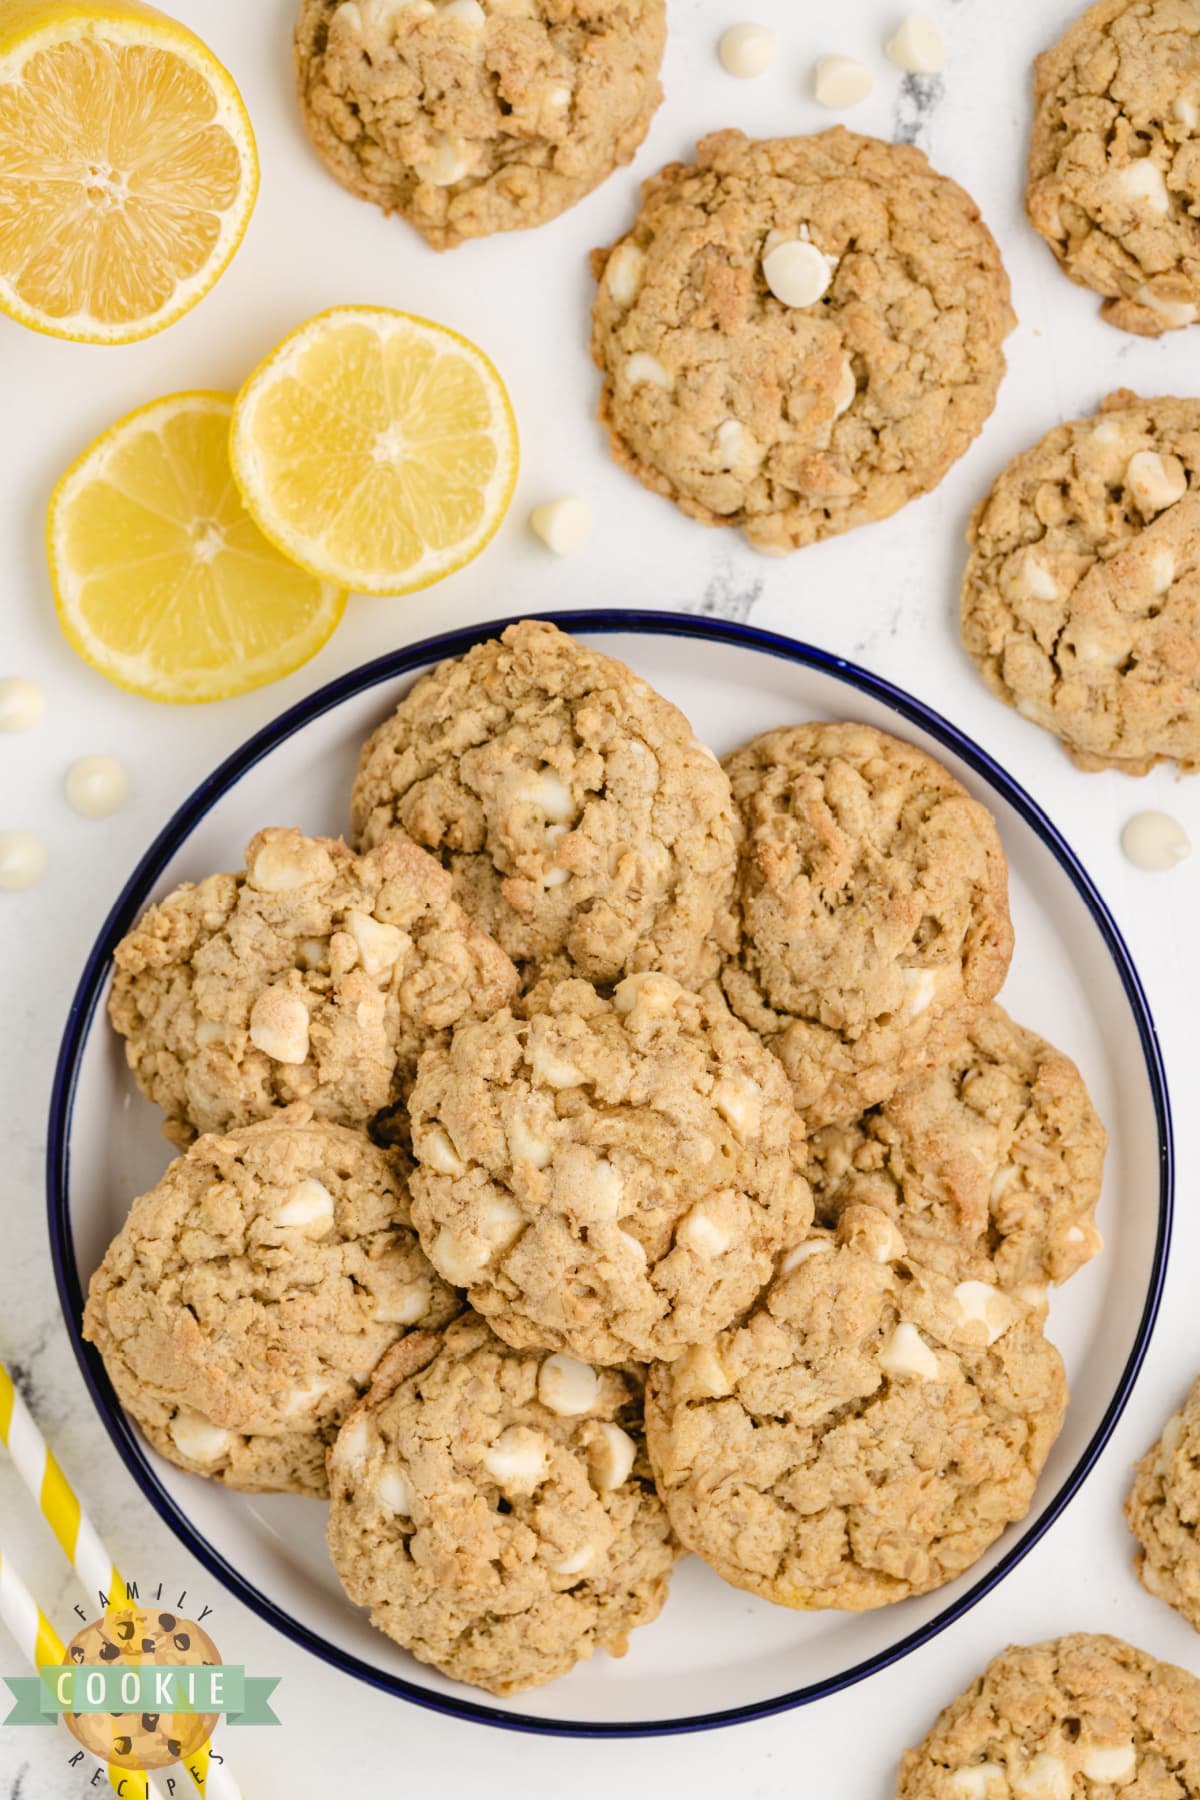 Oatmeal cookies made with lemon pudding and white chocolate chips.